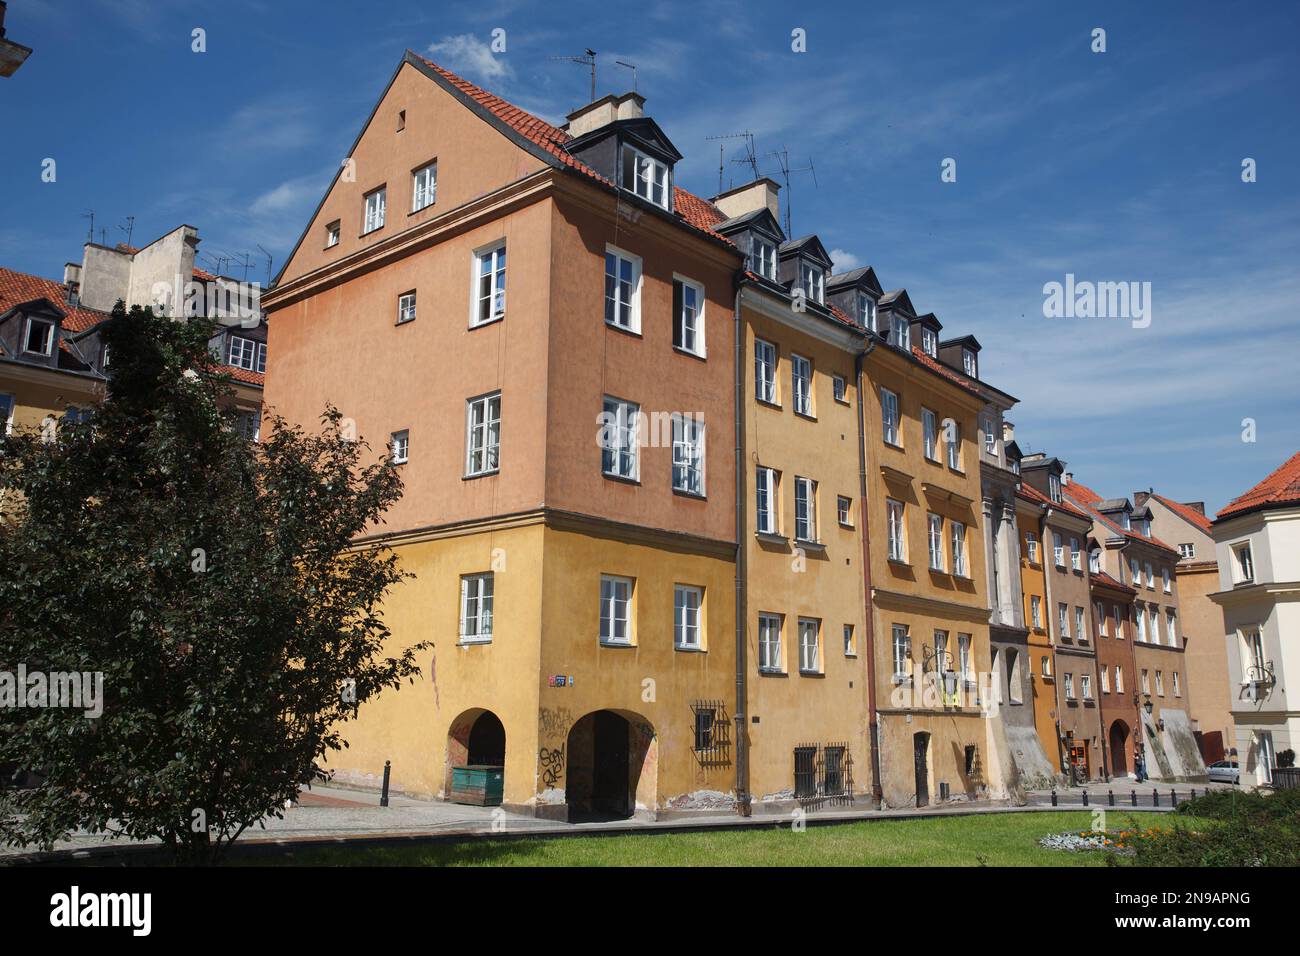 The residential buildings in Nowe Miasto town in Warsaw, Poland Stock Photo